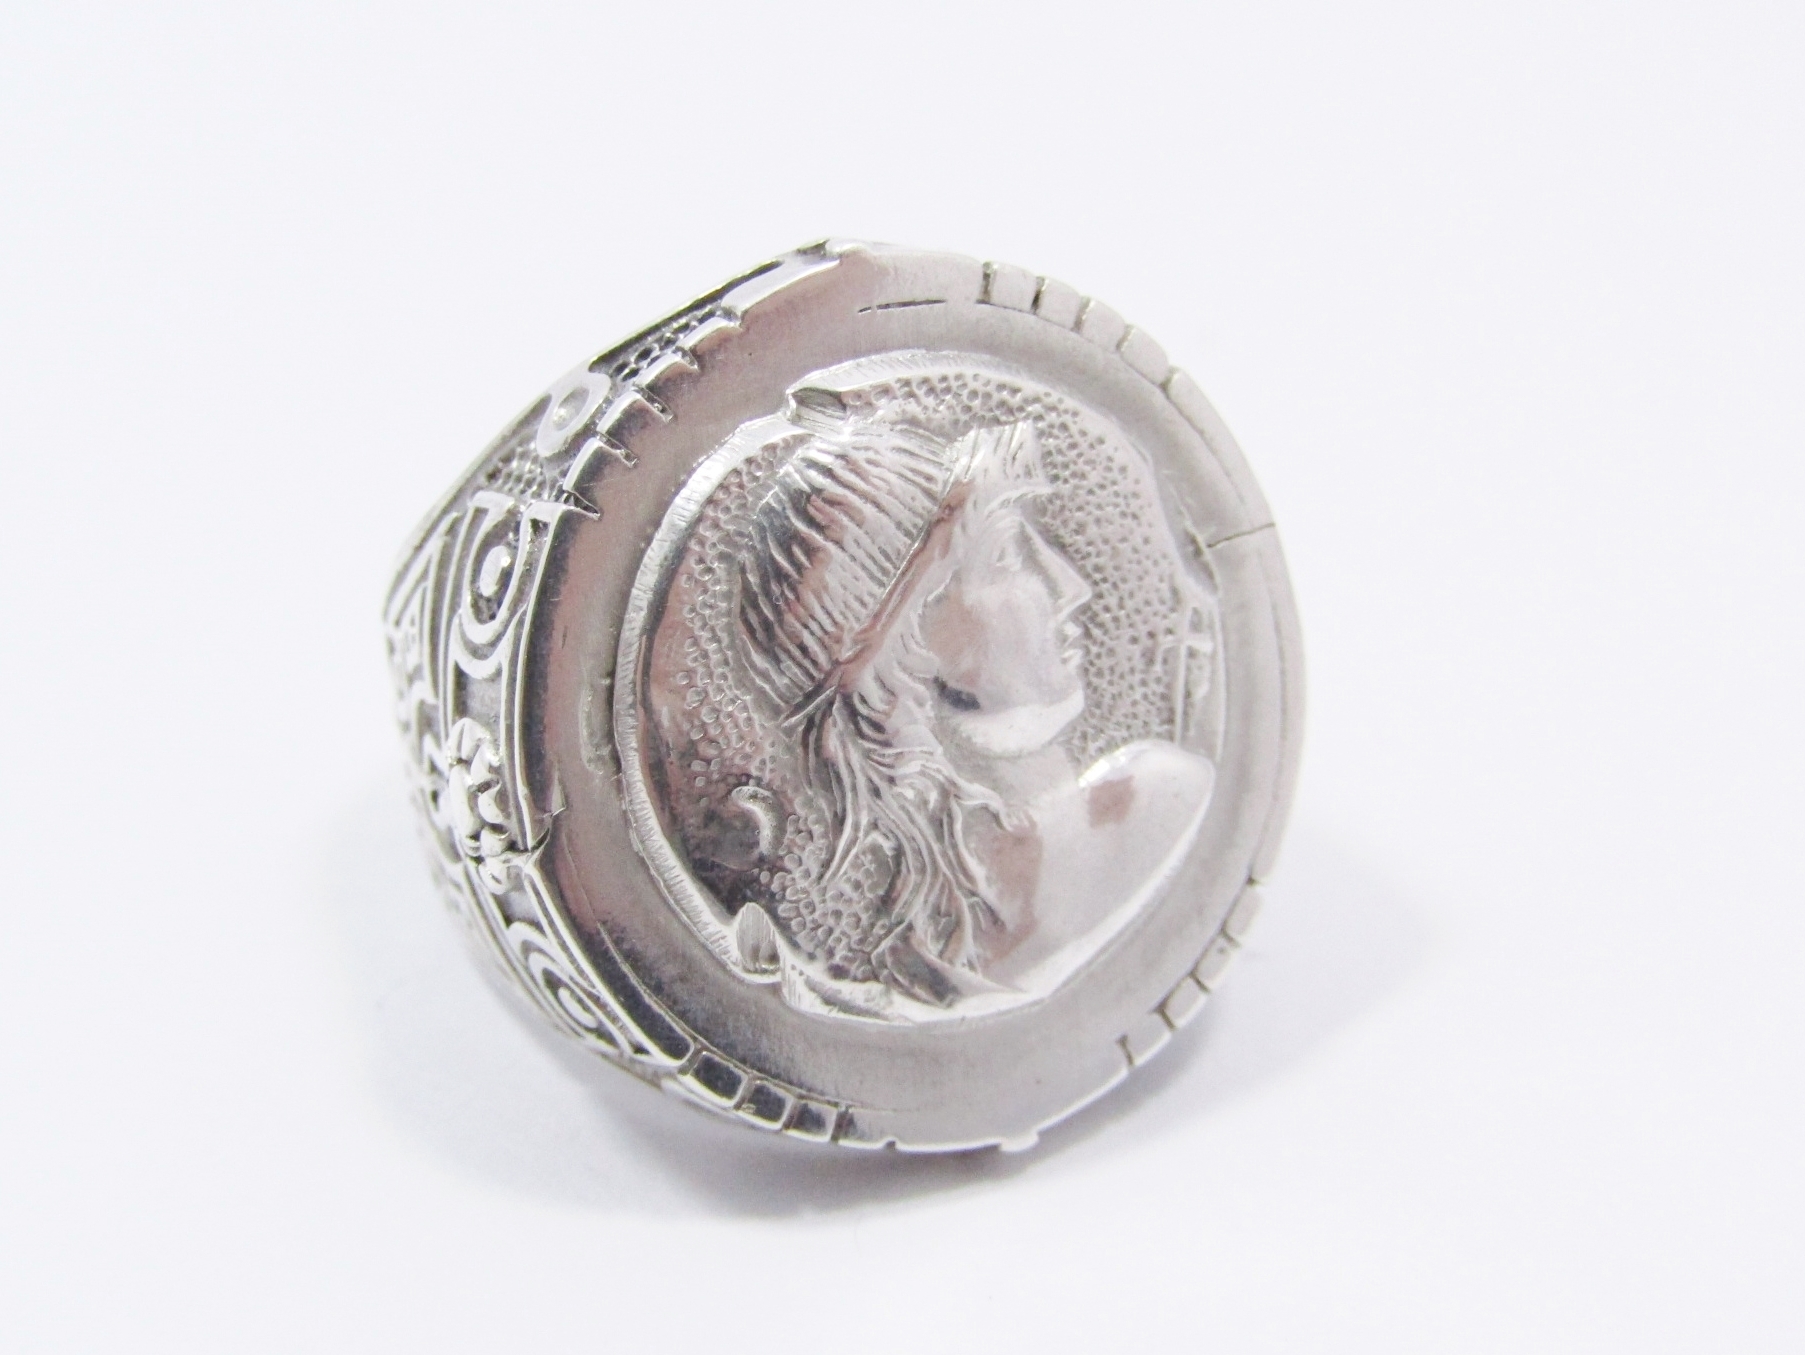 A Gorgeous Chunky Greek Macedonian Design ring in Sterling Silver.